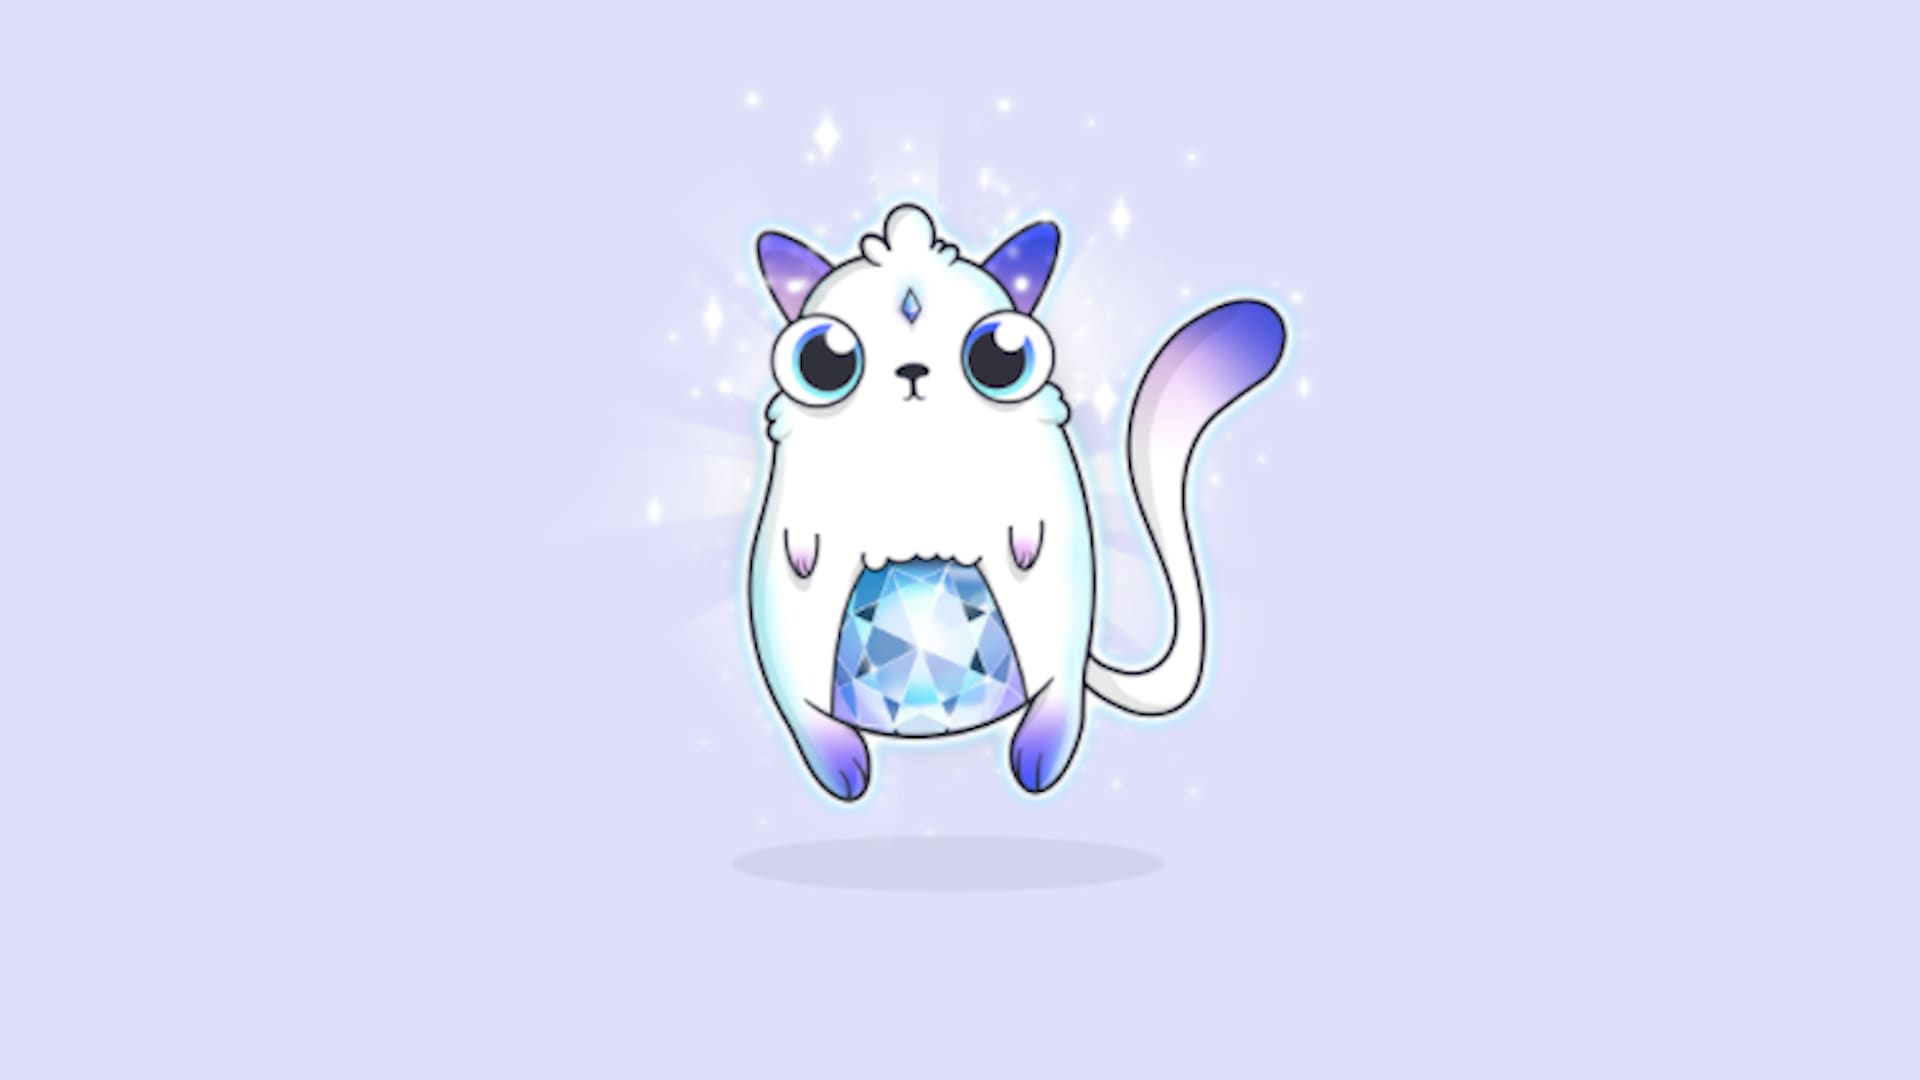 How To Make Money With Cryptokitties - The Cryption